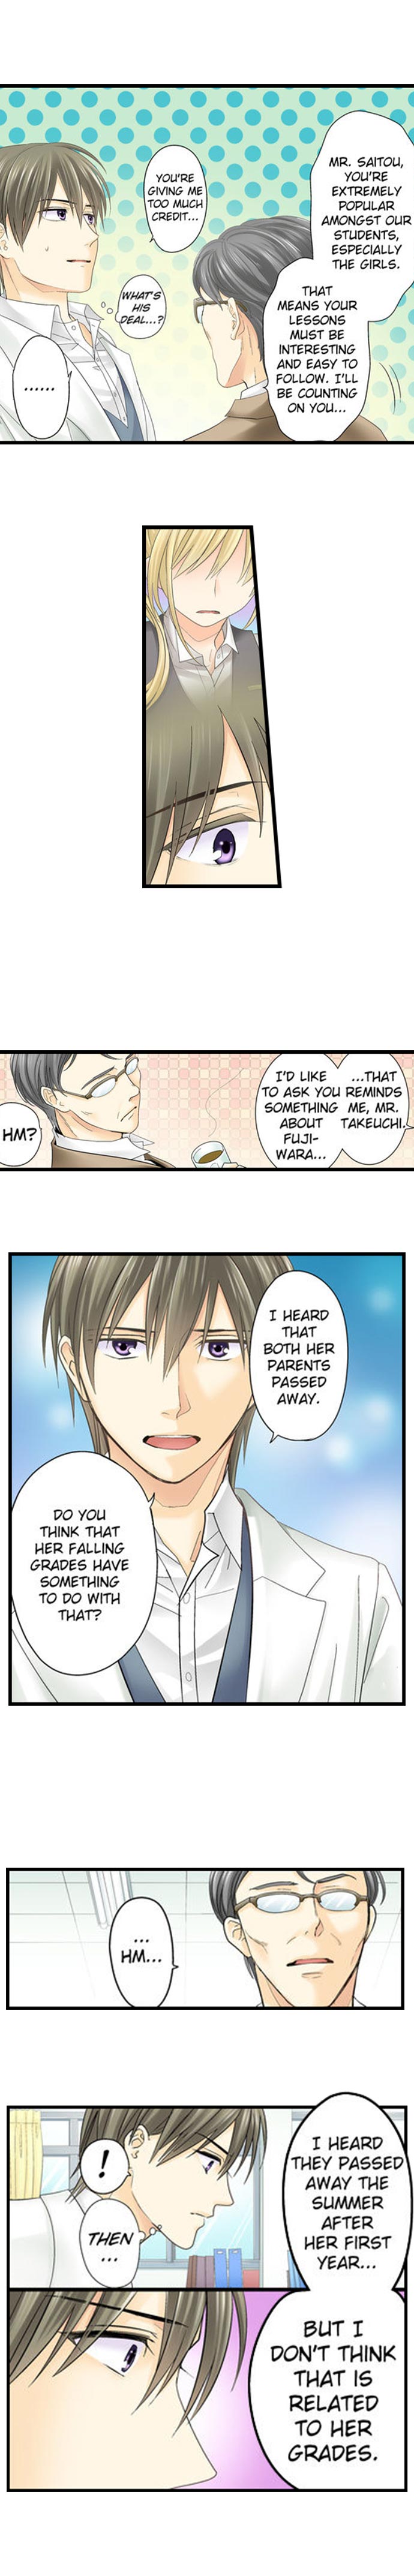 Running a Love Hotel with My Math Teacher - Chapter 7 Page 4